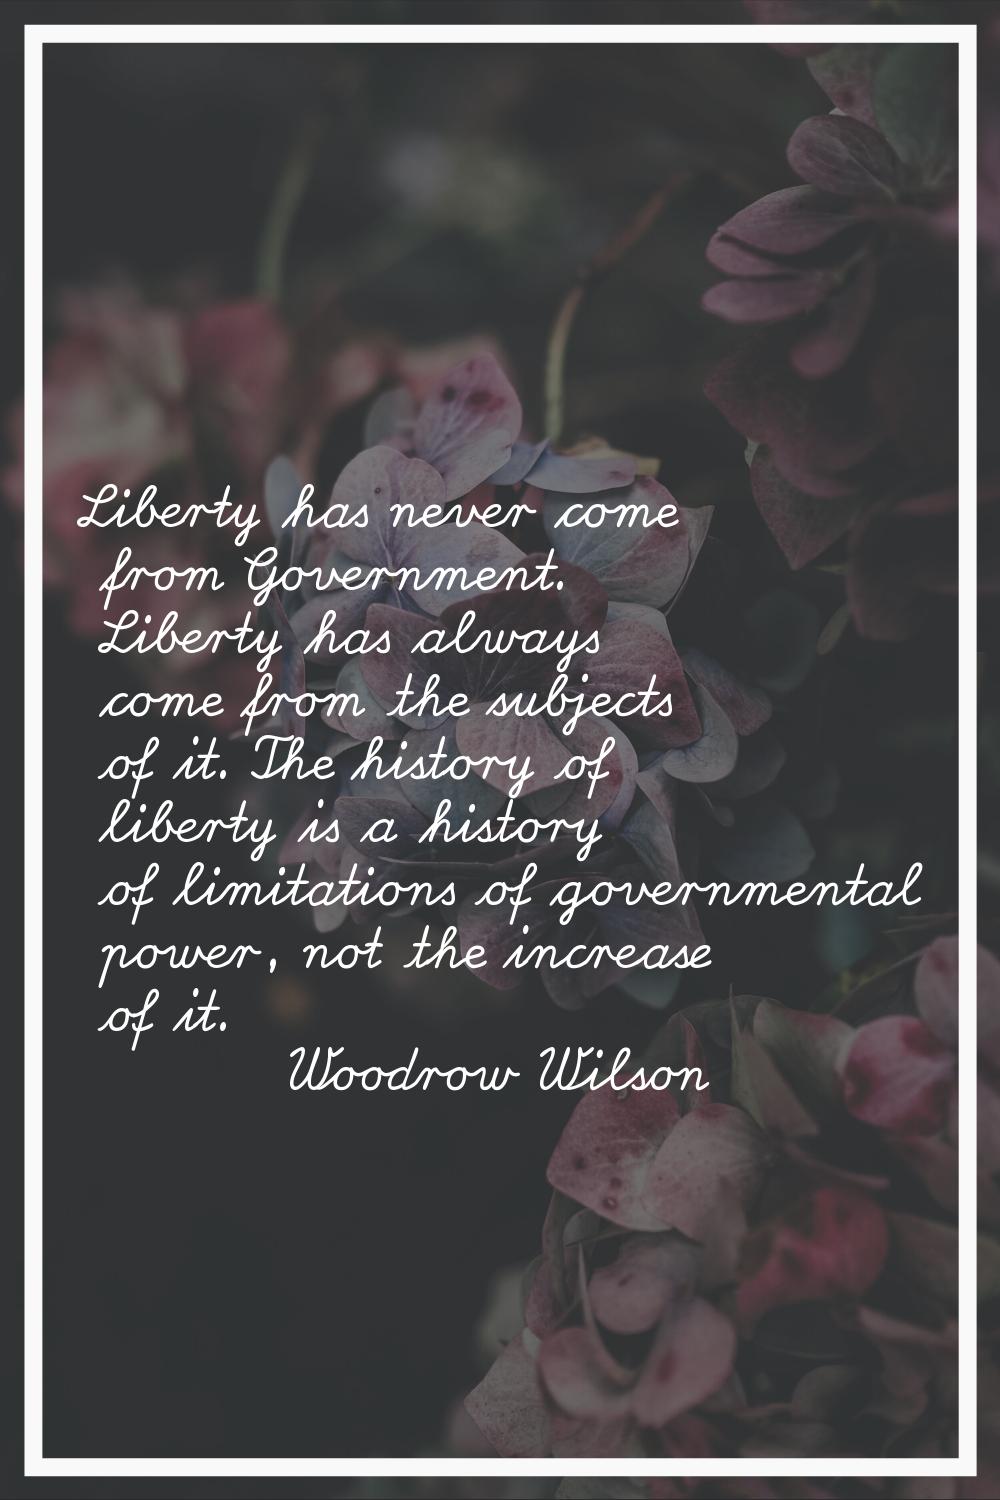 Liberty has never come from Government. Liberty has always come from the subjects of it. The histor